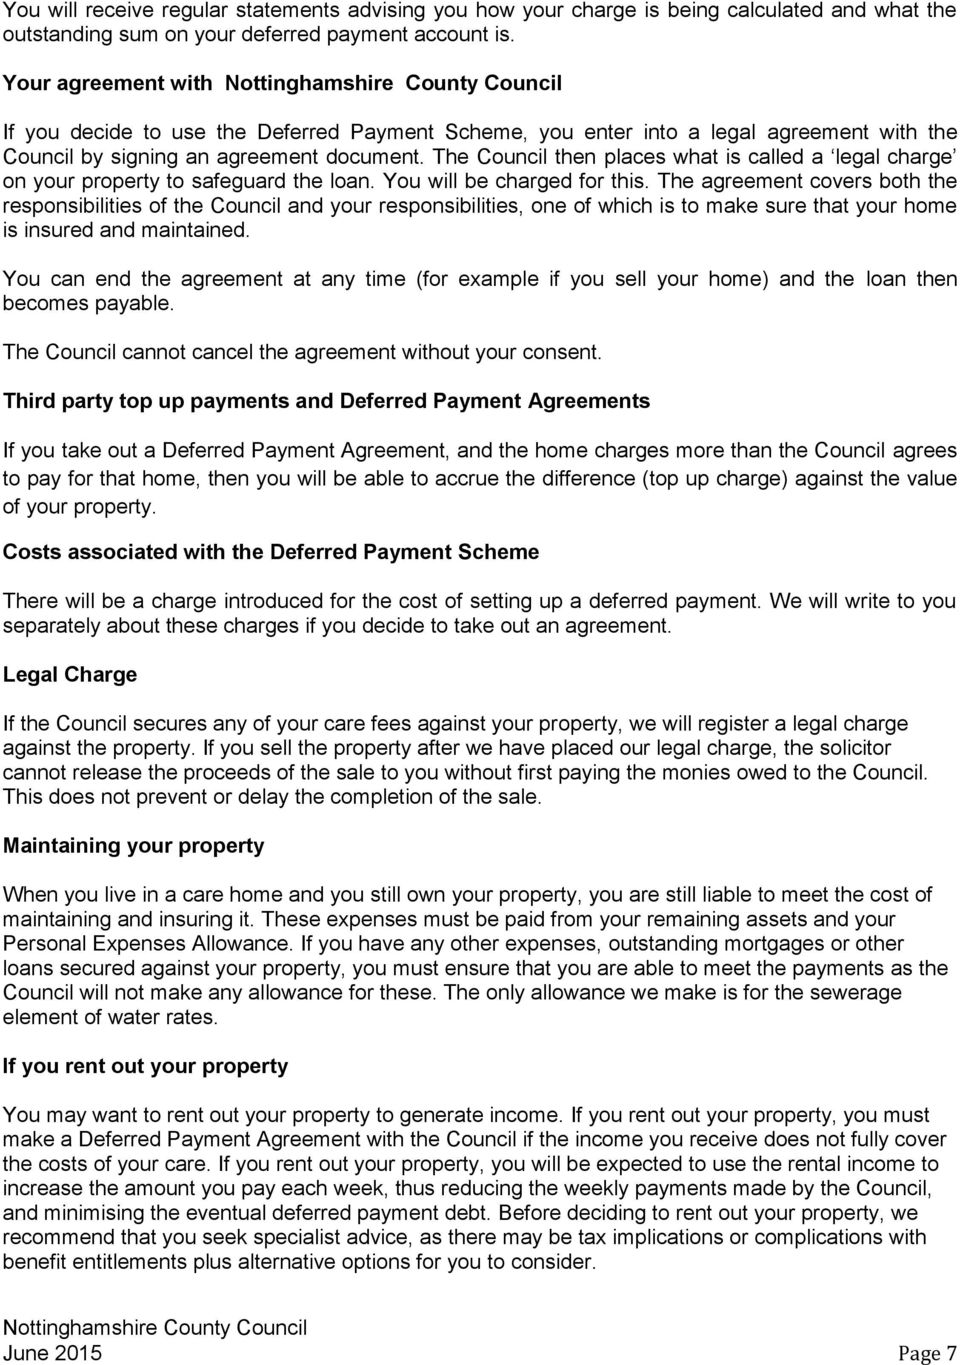 The Council then places what is called a legal charge on your property to safeguard the loan. You will be charged for this.